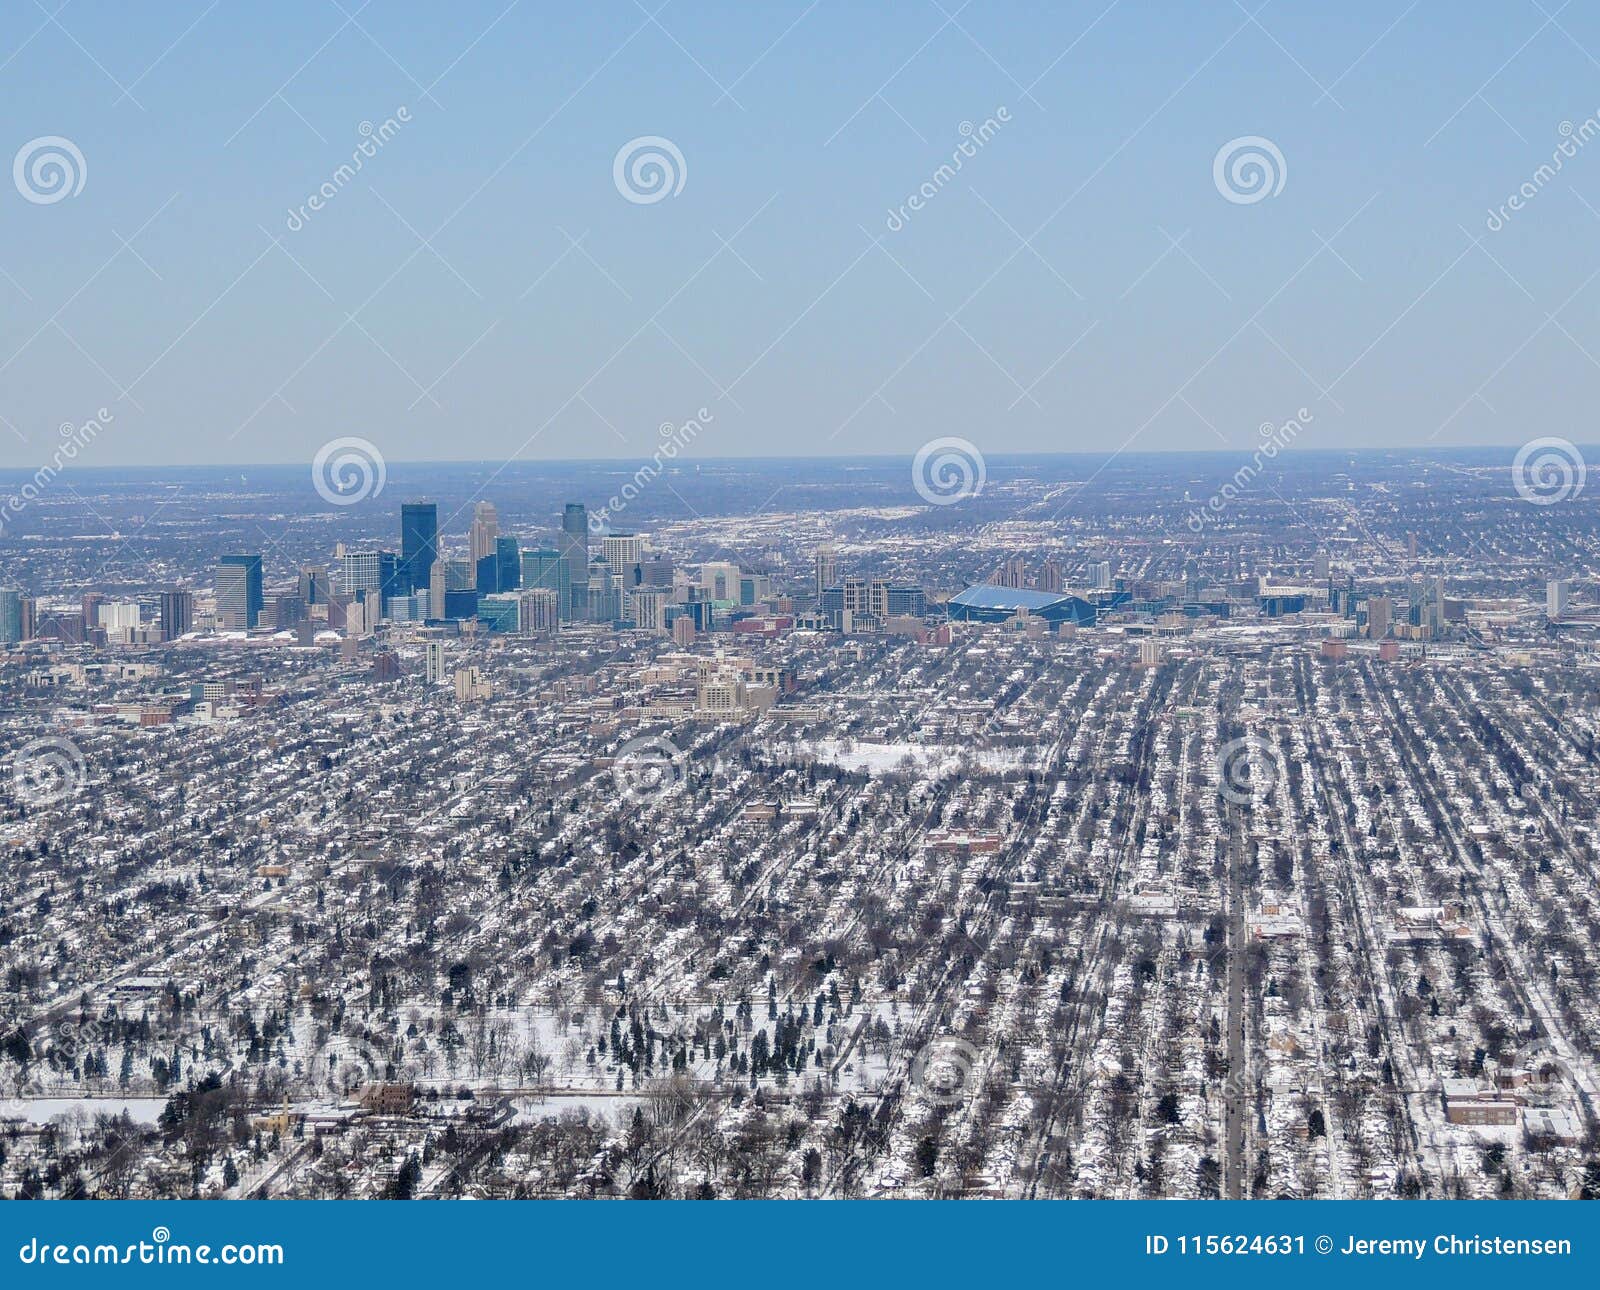 Aerial Photography Map of South St Paul, MN Minnesota